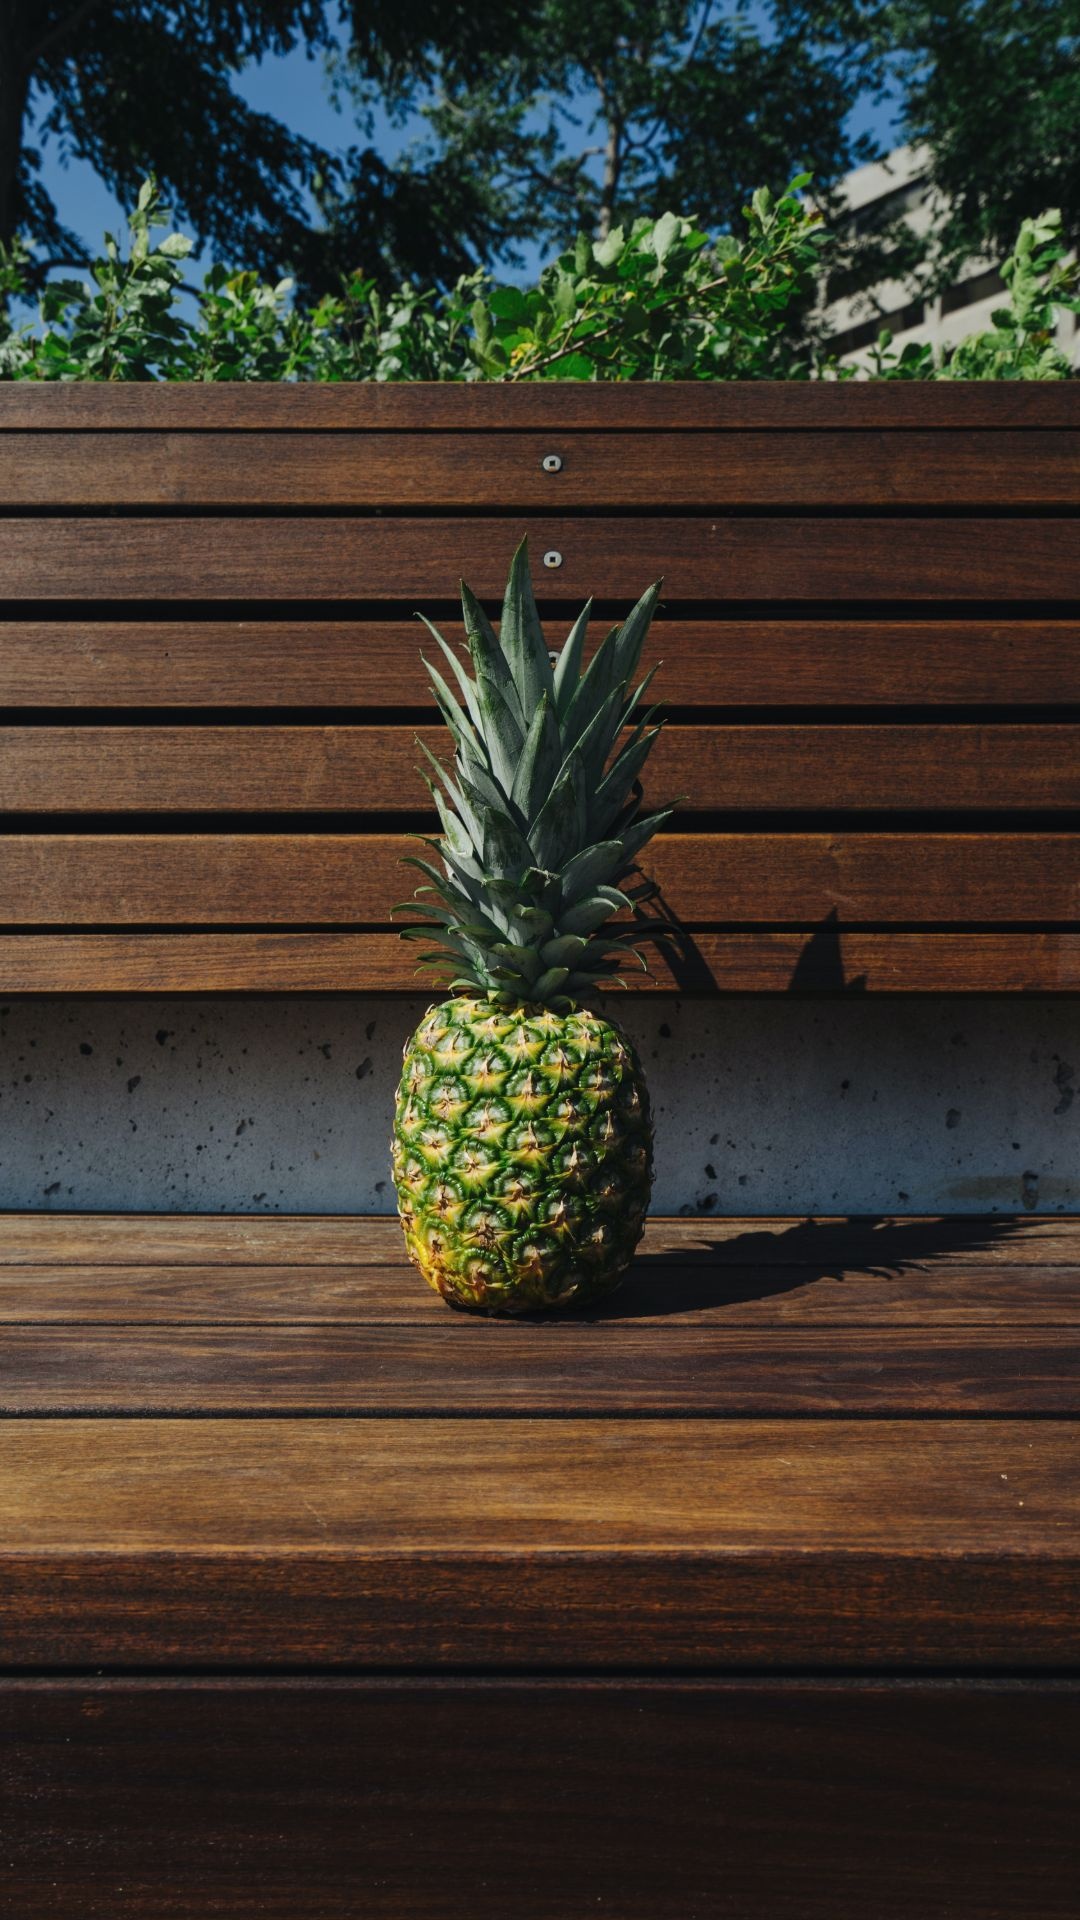 Pineapple: Famed as the fruit of labor, as the plant takes up to 3 years to fully grow and mature. 1080x1920 Full HD Wallpaper.